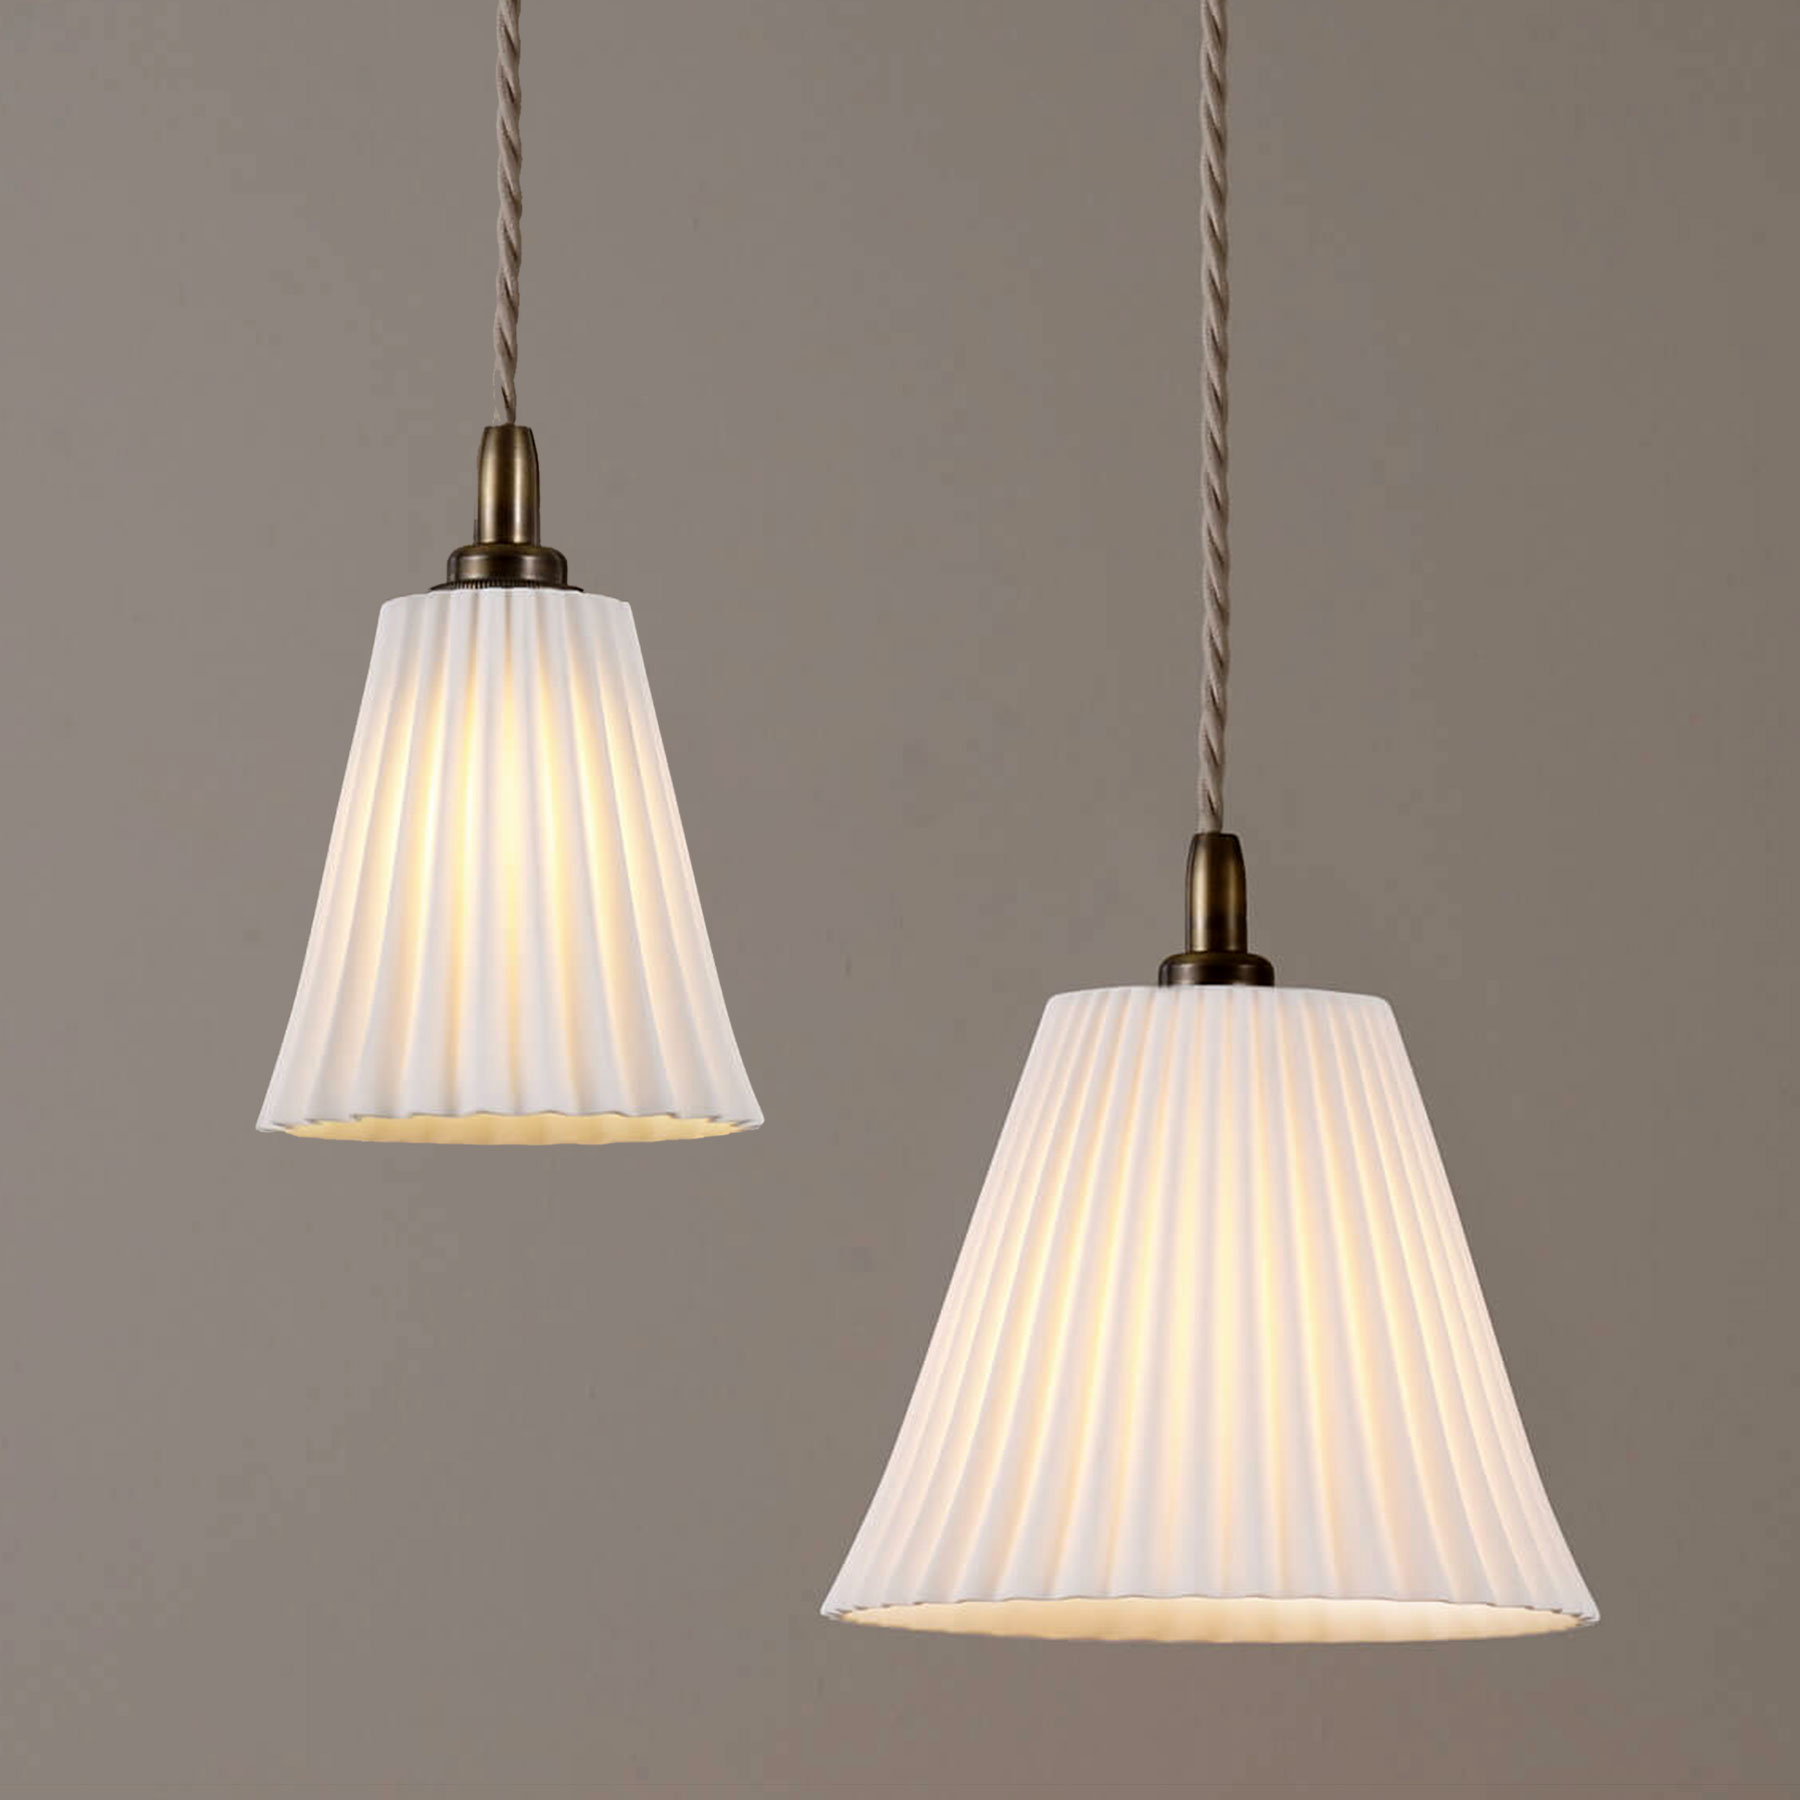 Charming Pleated China Pendant Light PLEAT, two sizes